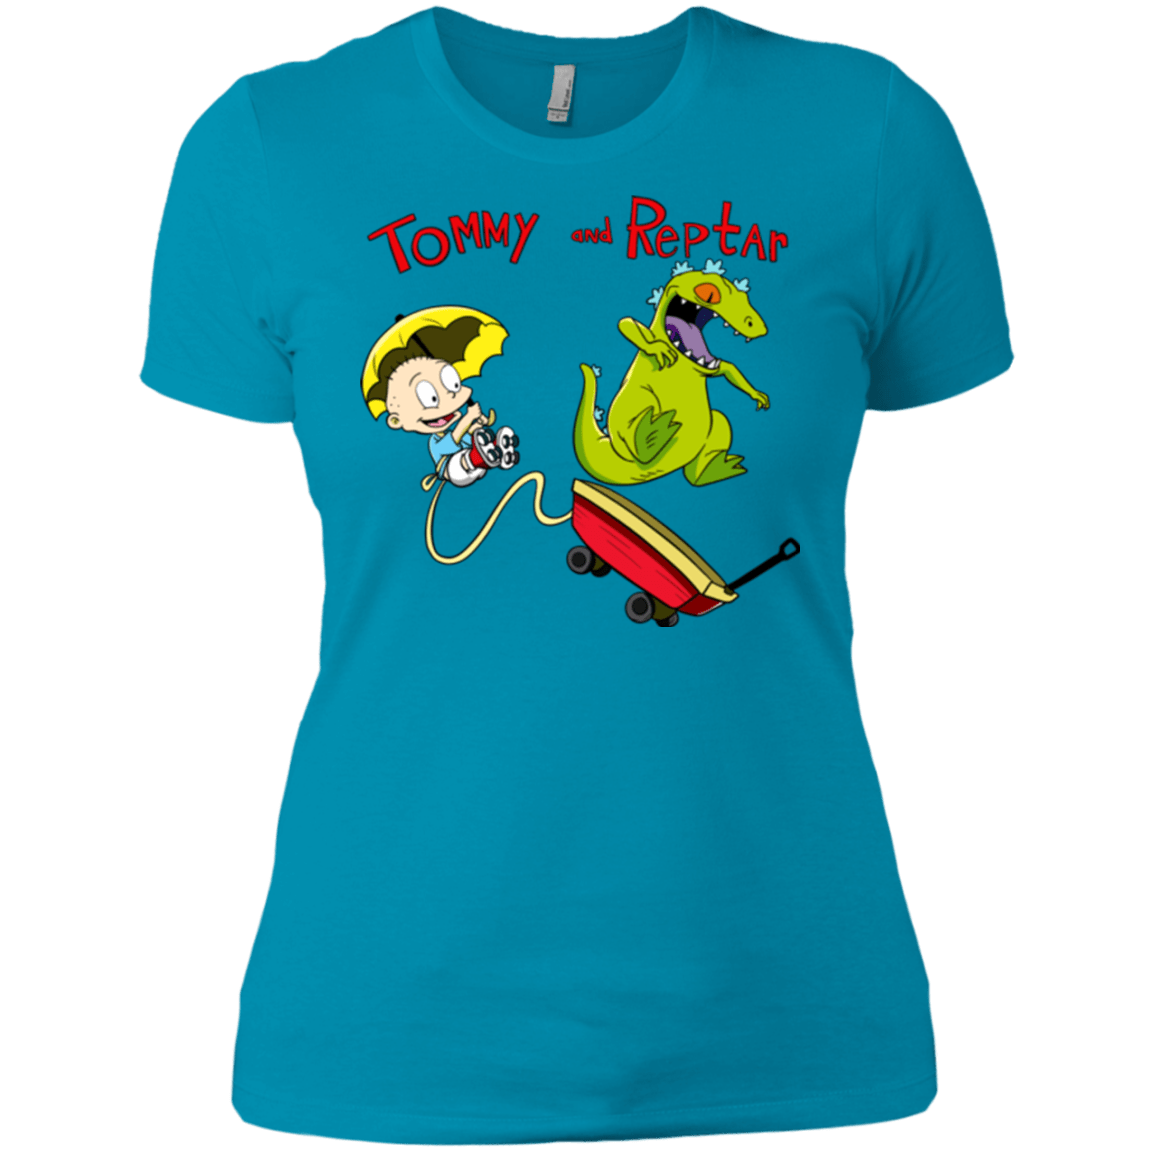 Tommy and Reptar Women's Premium T-Shirt